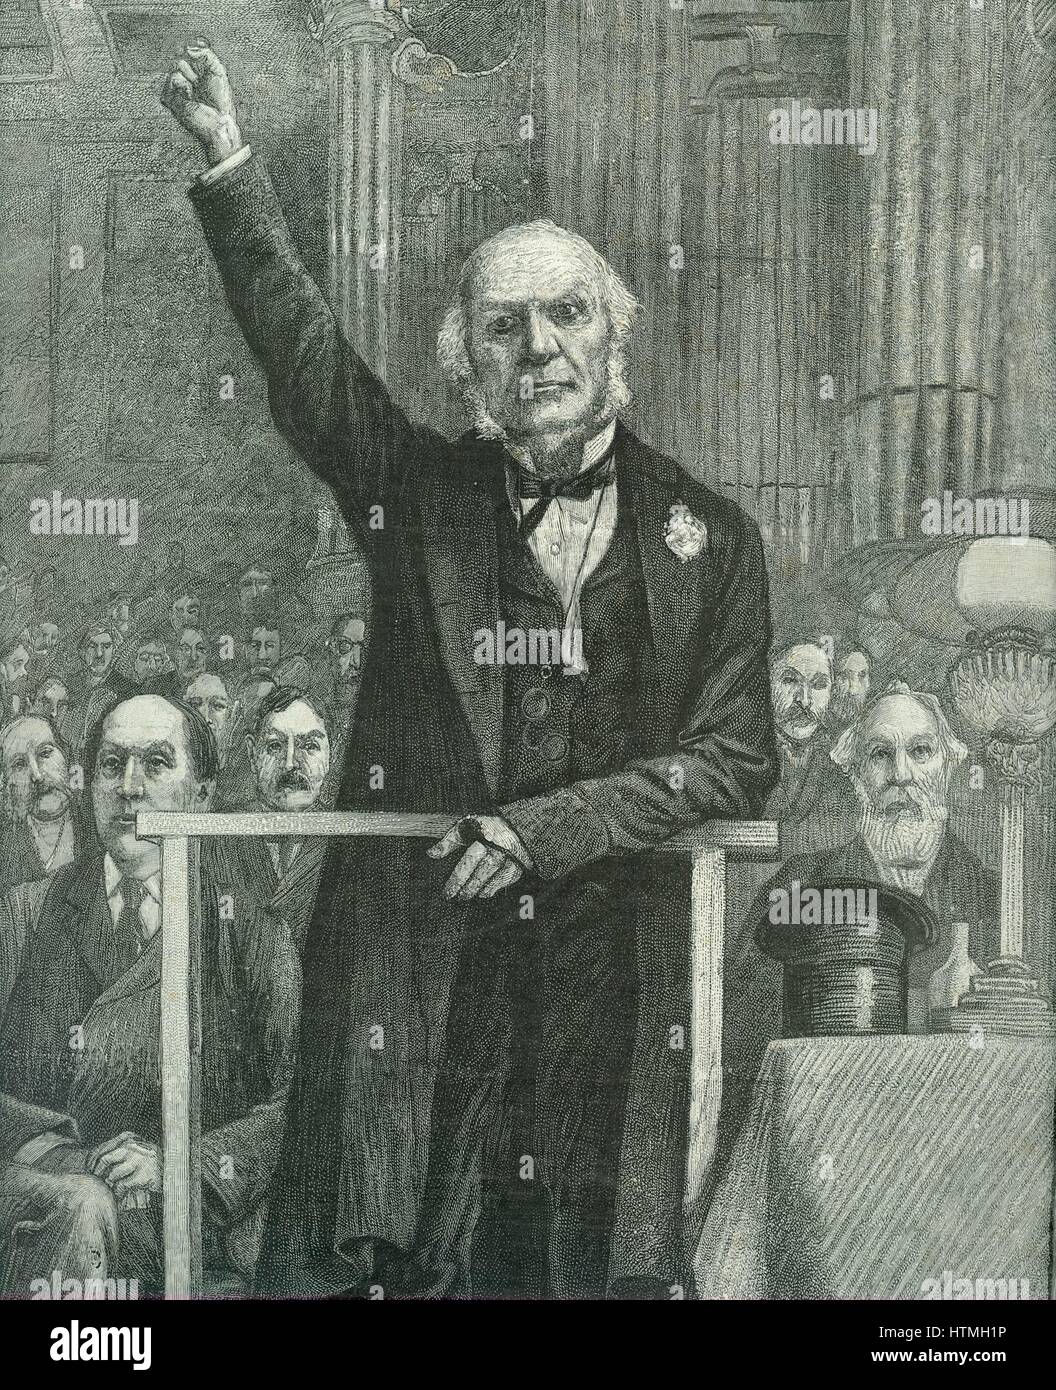 William Ewart Gladstone (Liberal) campaigning in Edinburgh during the 1892 election caused by the fall of Lord Salisbury's Conservative government. Gladstone won the election and became Prime Minister for the fourth and last time. From 'The Illustrated London News', 9 July 1892. Stock Photo